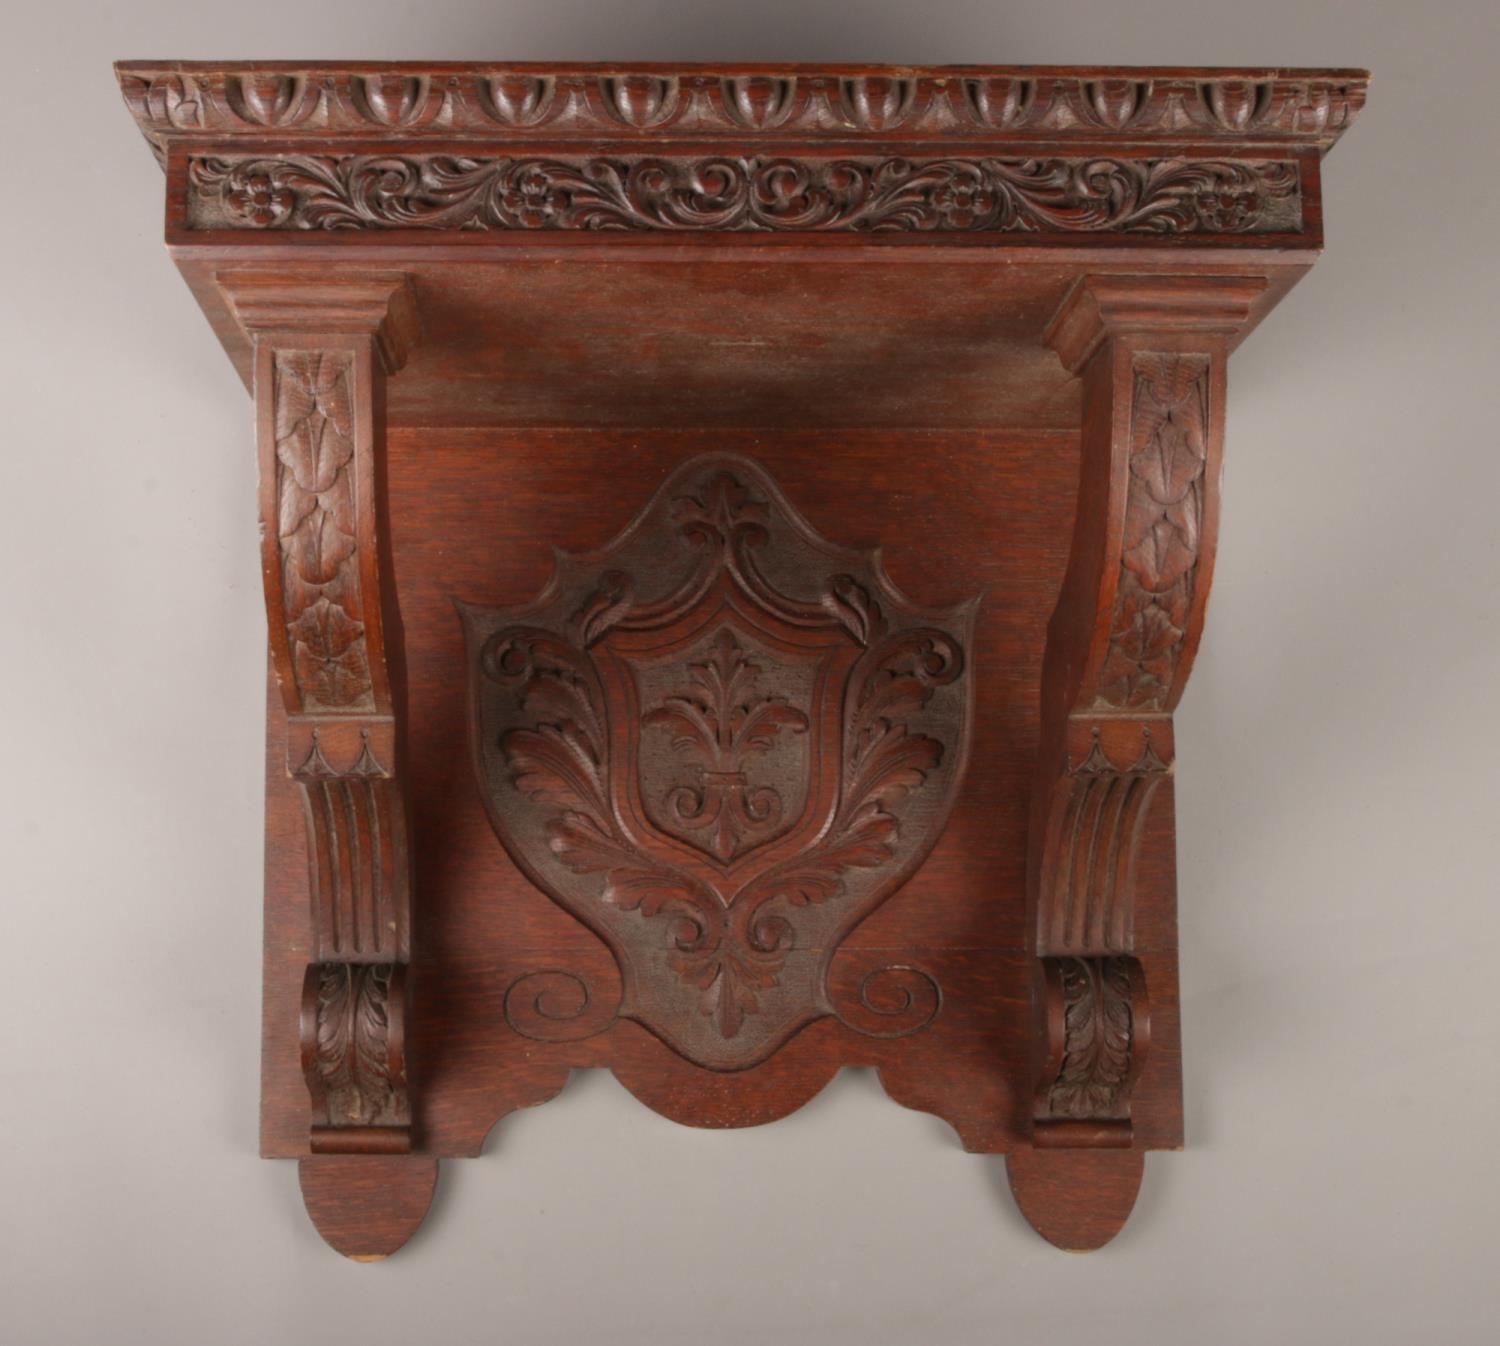 A large carved oak wall shelf, with crest to the underside and floral and foliate border. Height: